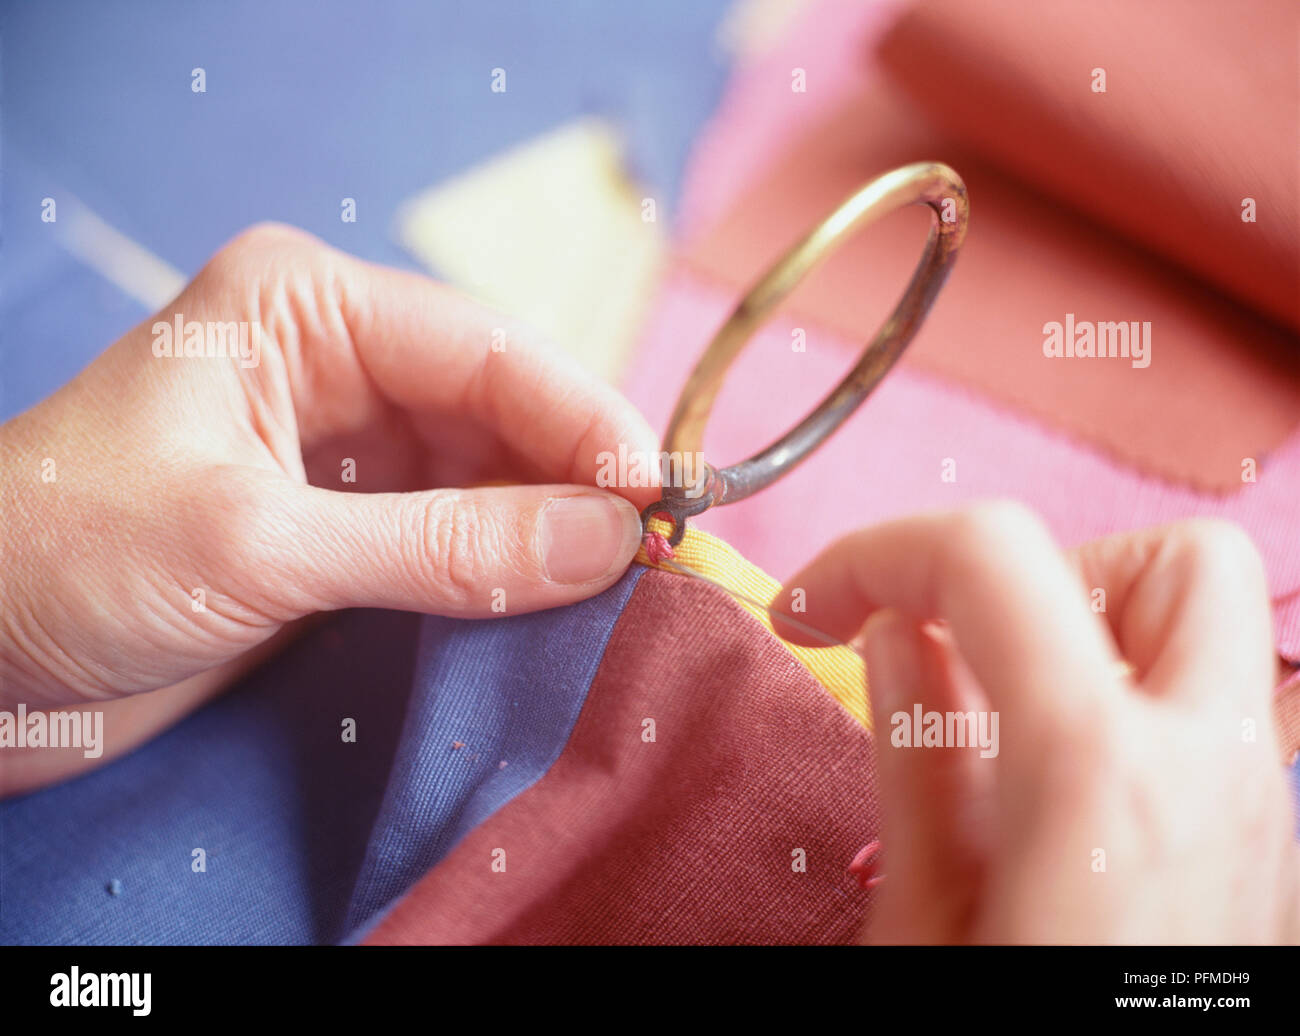 Hands sewing metal curtain rings to red, blue and yellow material, pulling embroidery thread through eyelet rings. Stock Photo